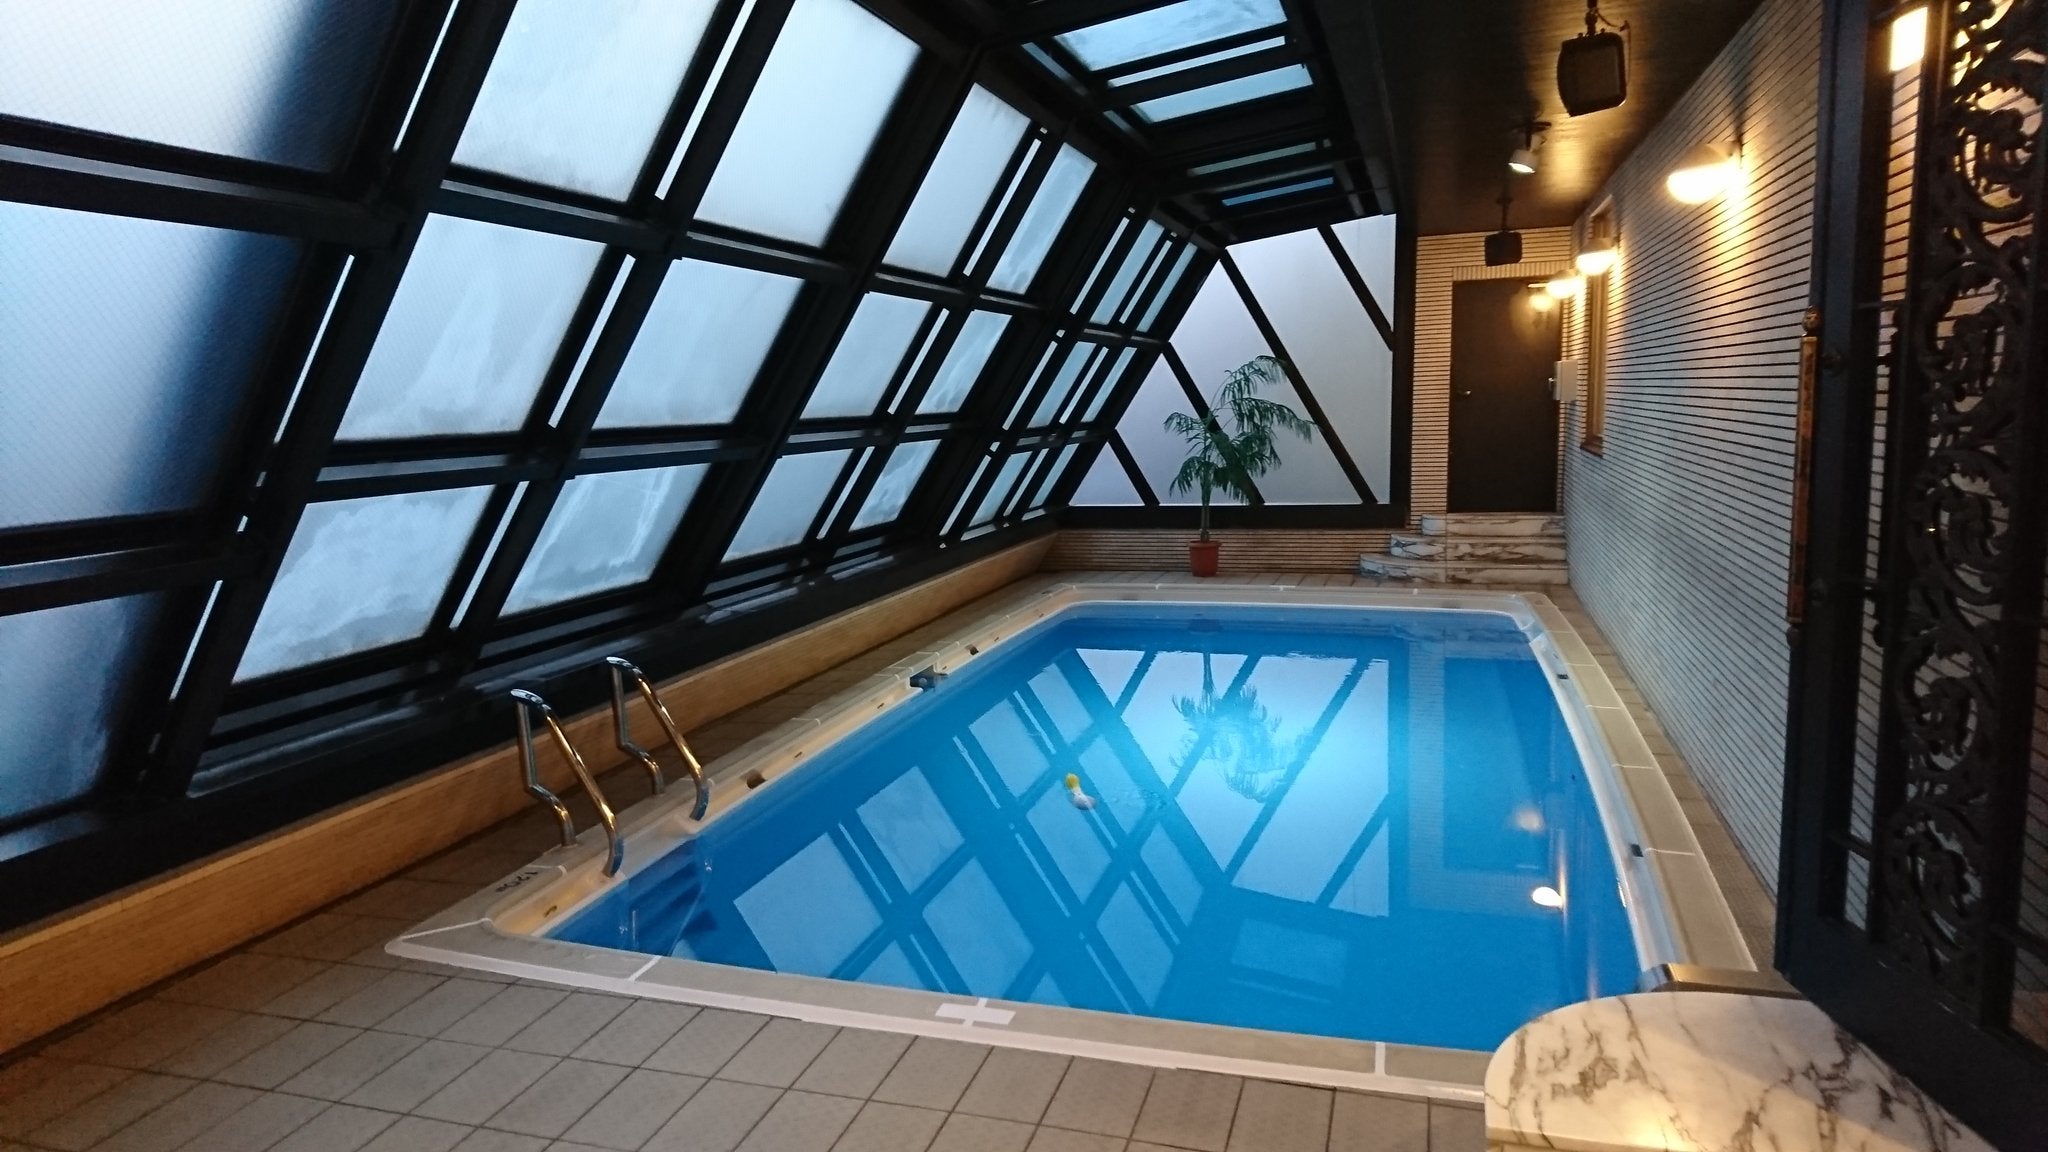 The Most Infamous Swimming Pool In Japanese Pornography.